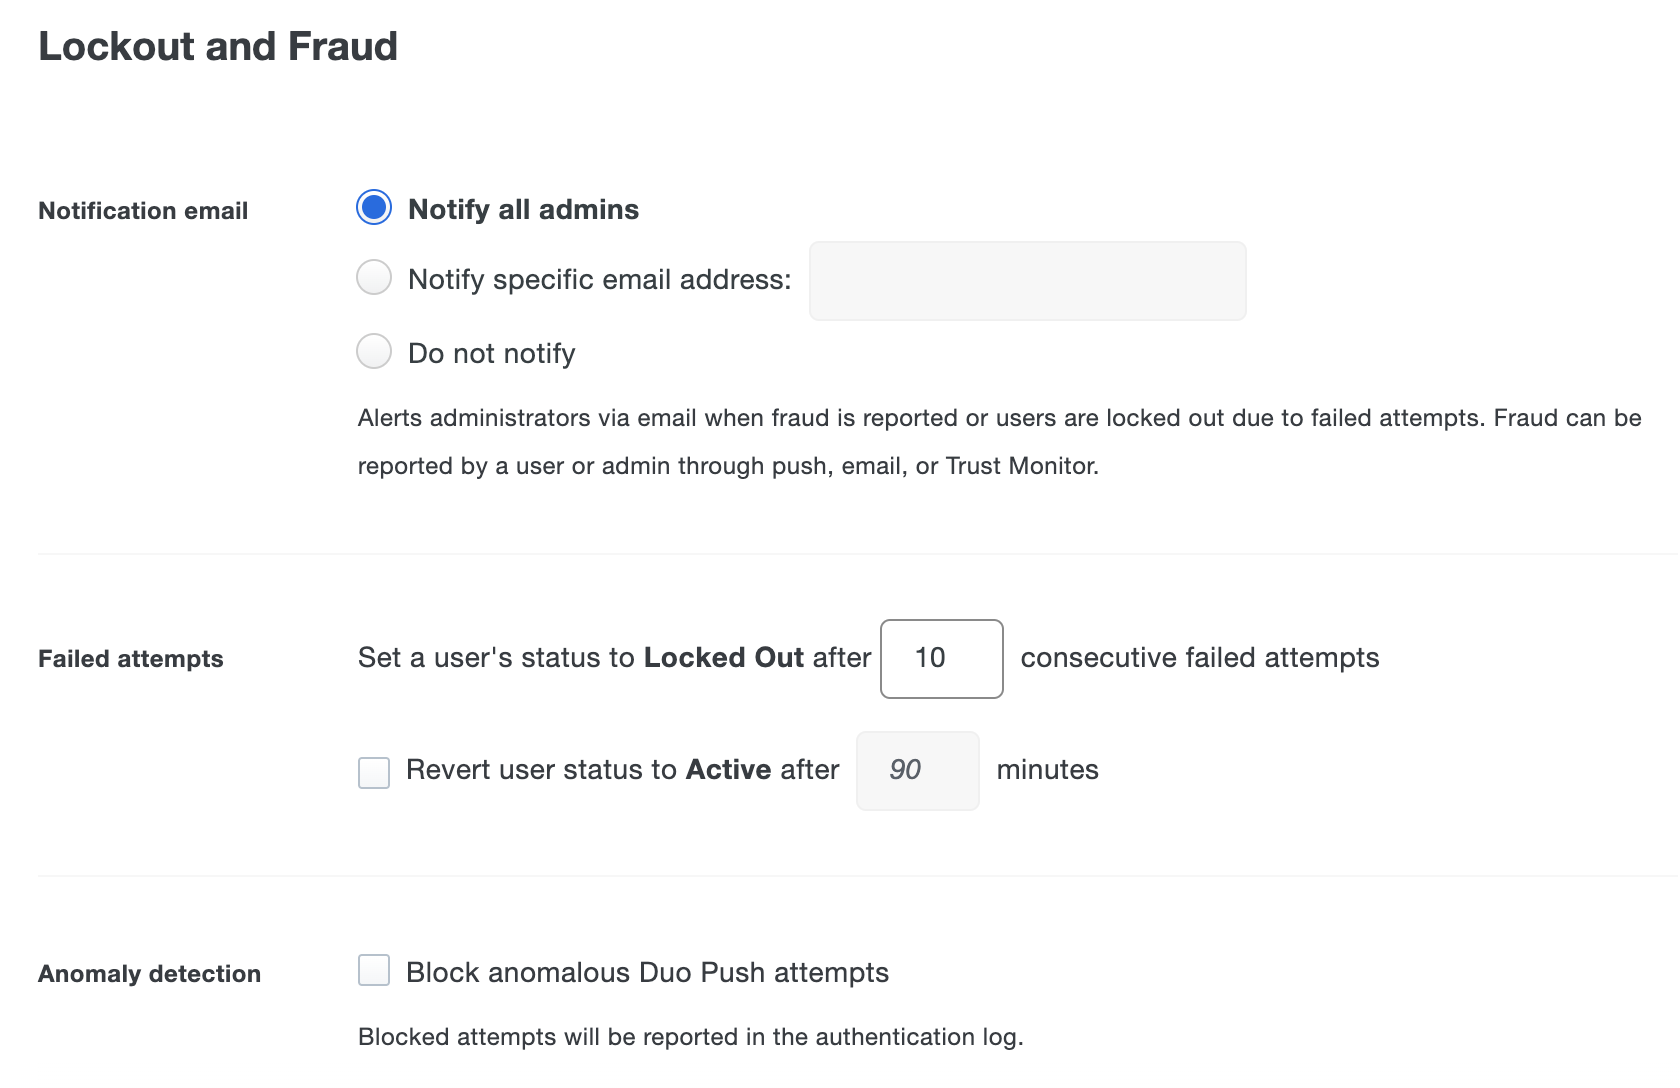 Lockout and fraud settings